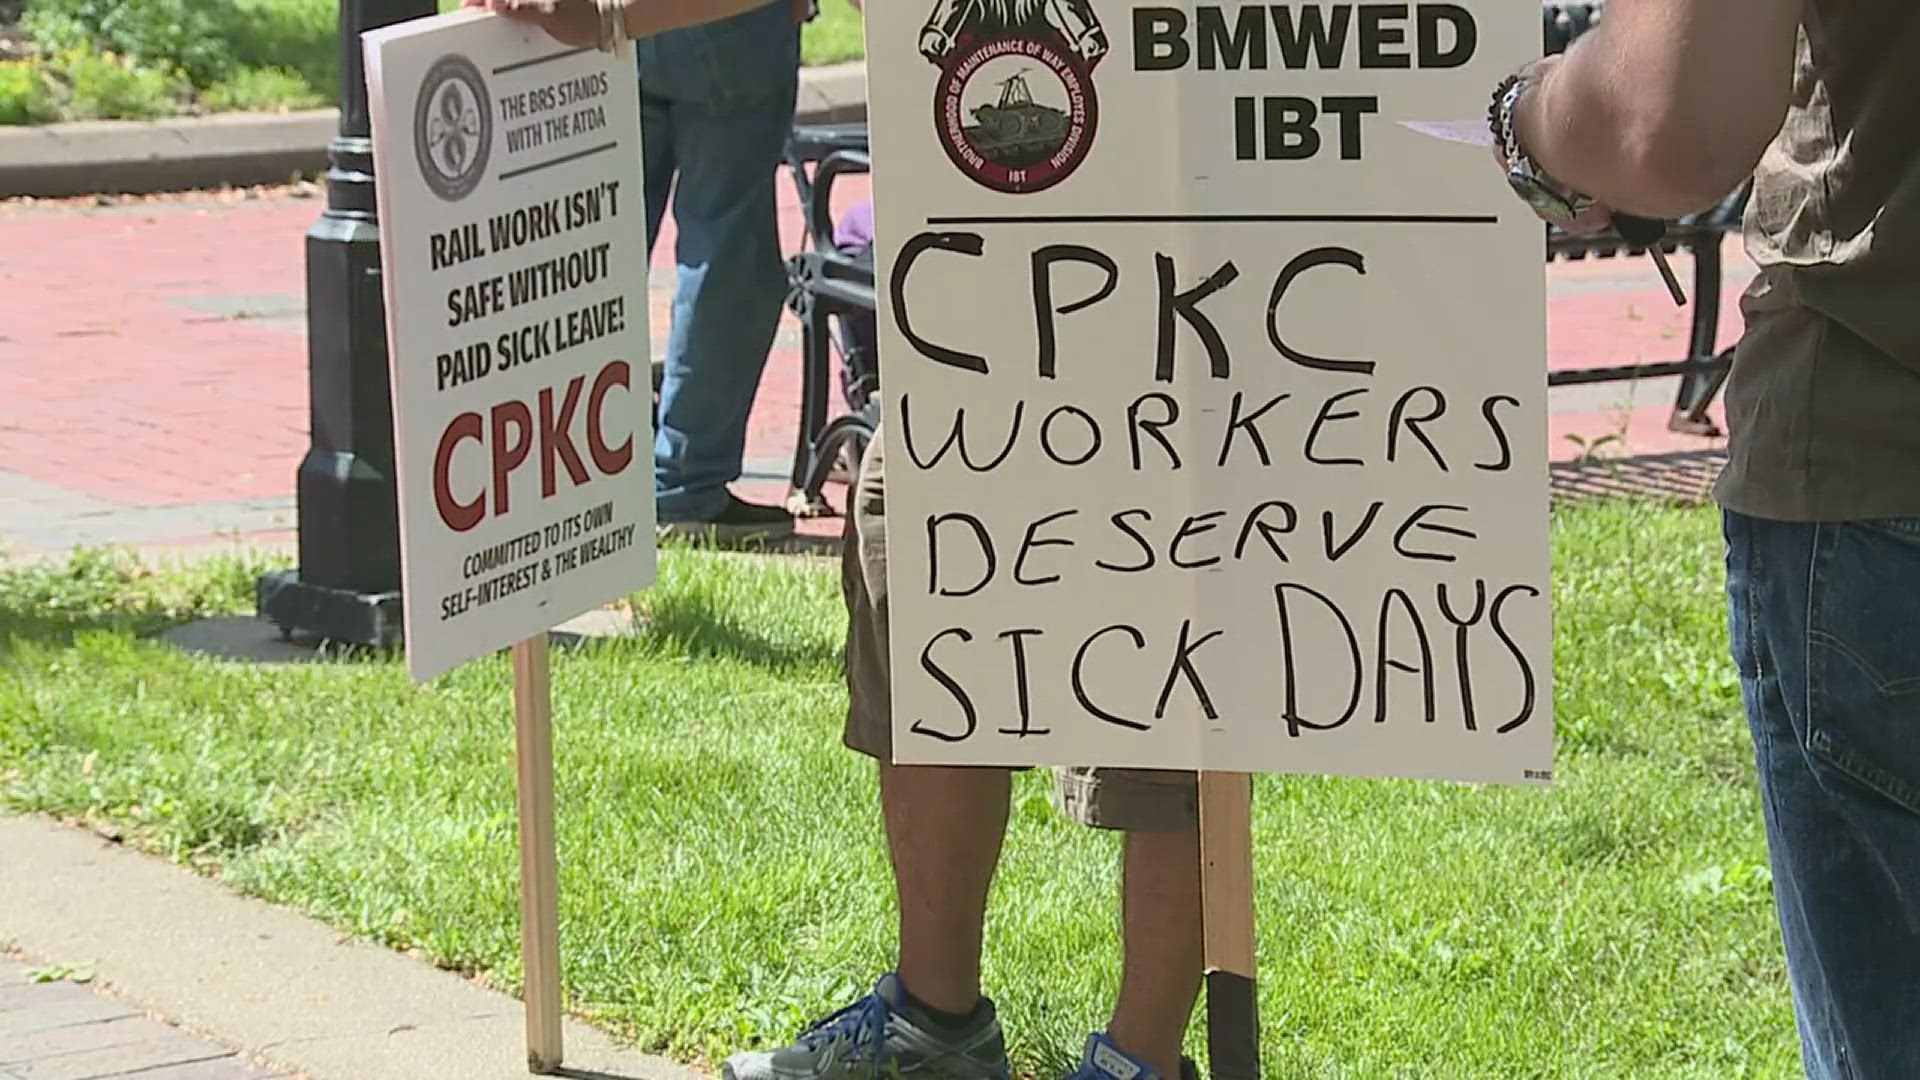 About half a dozen picketers showed up to Quinlan Court in Davenport urging CPKC to approve paid sick days.